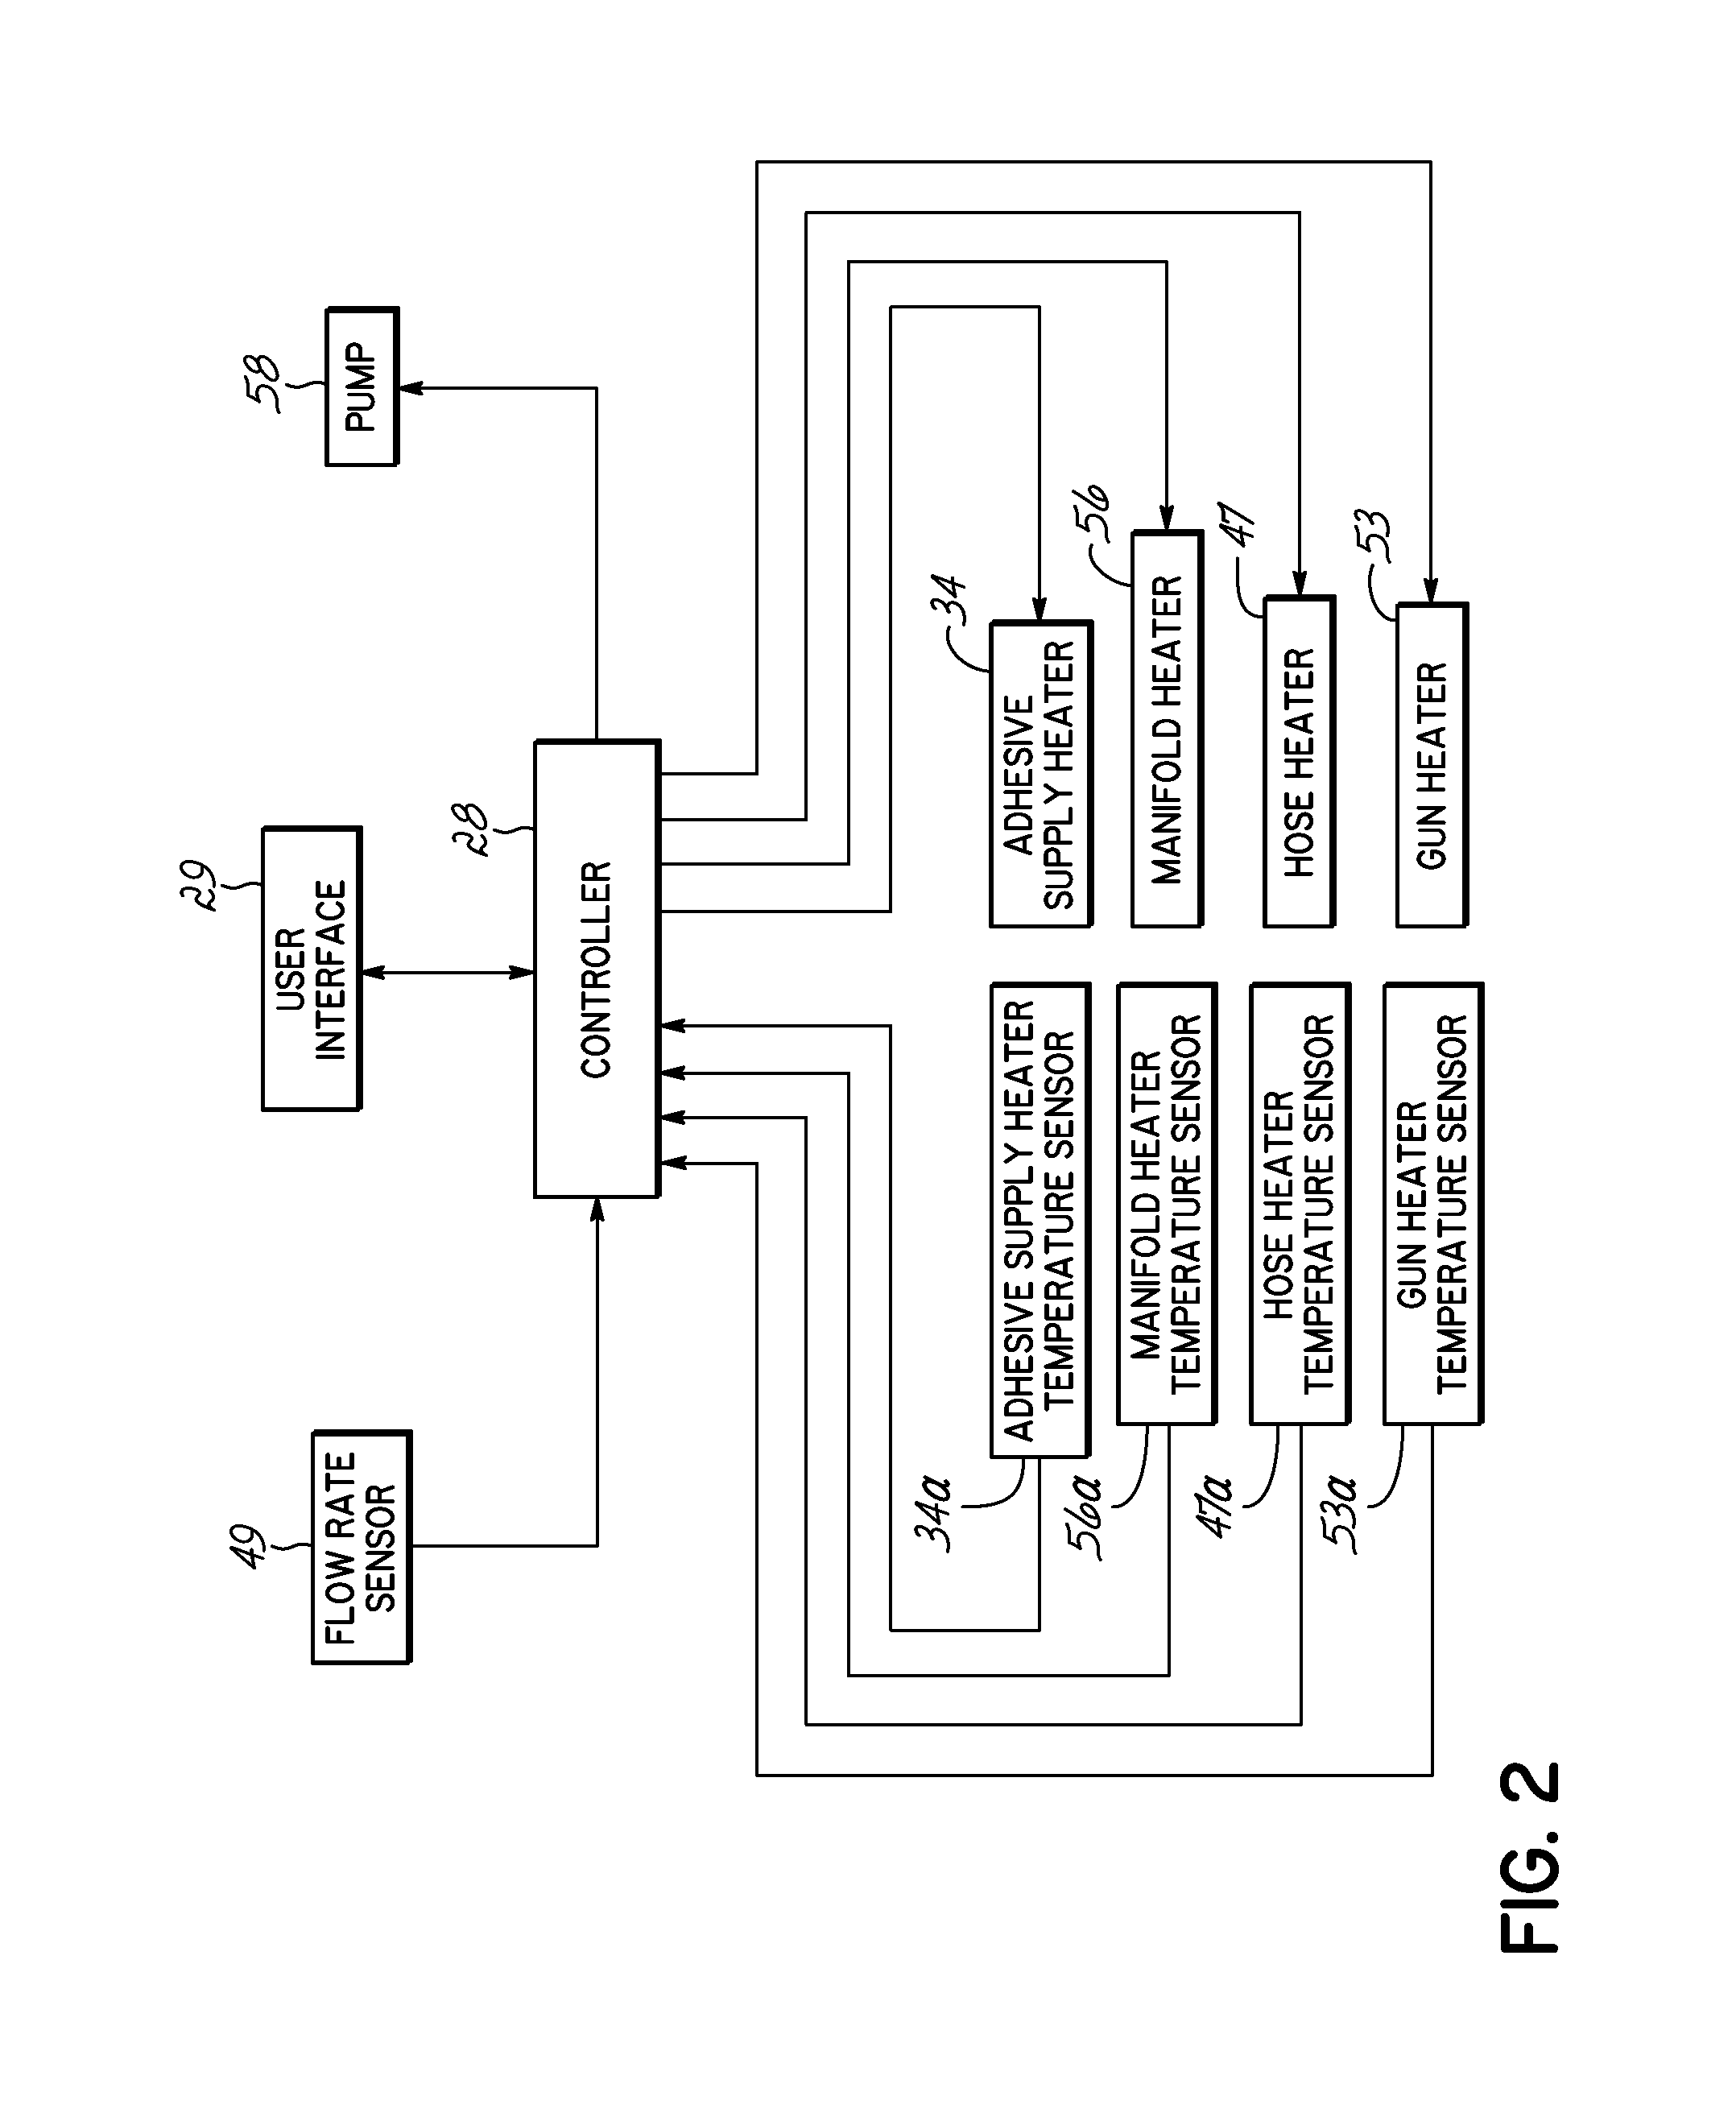 Hot melt dispensing unit and method with integrated flow control